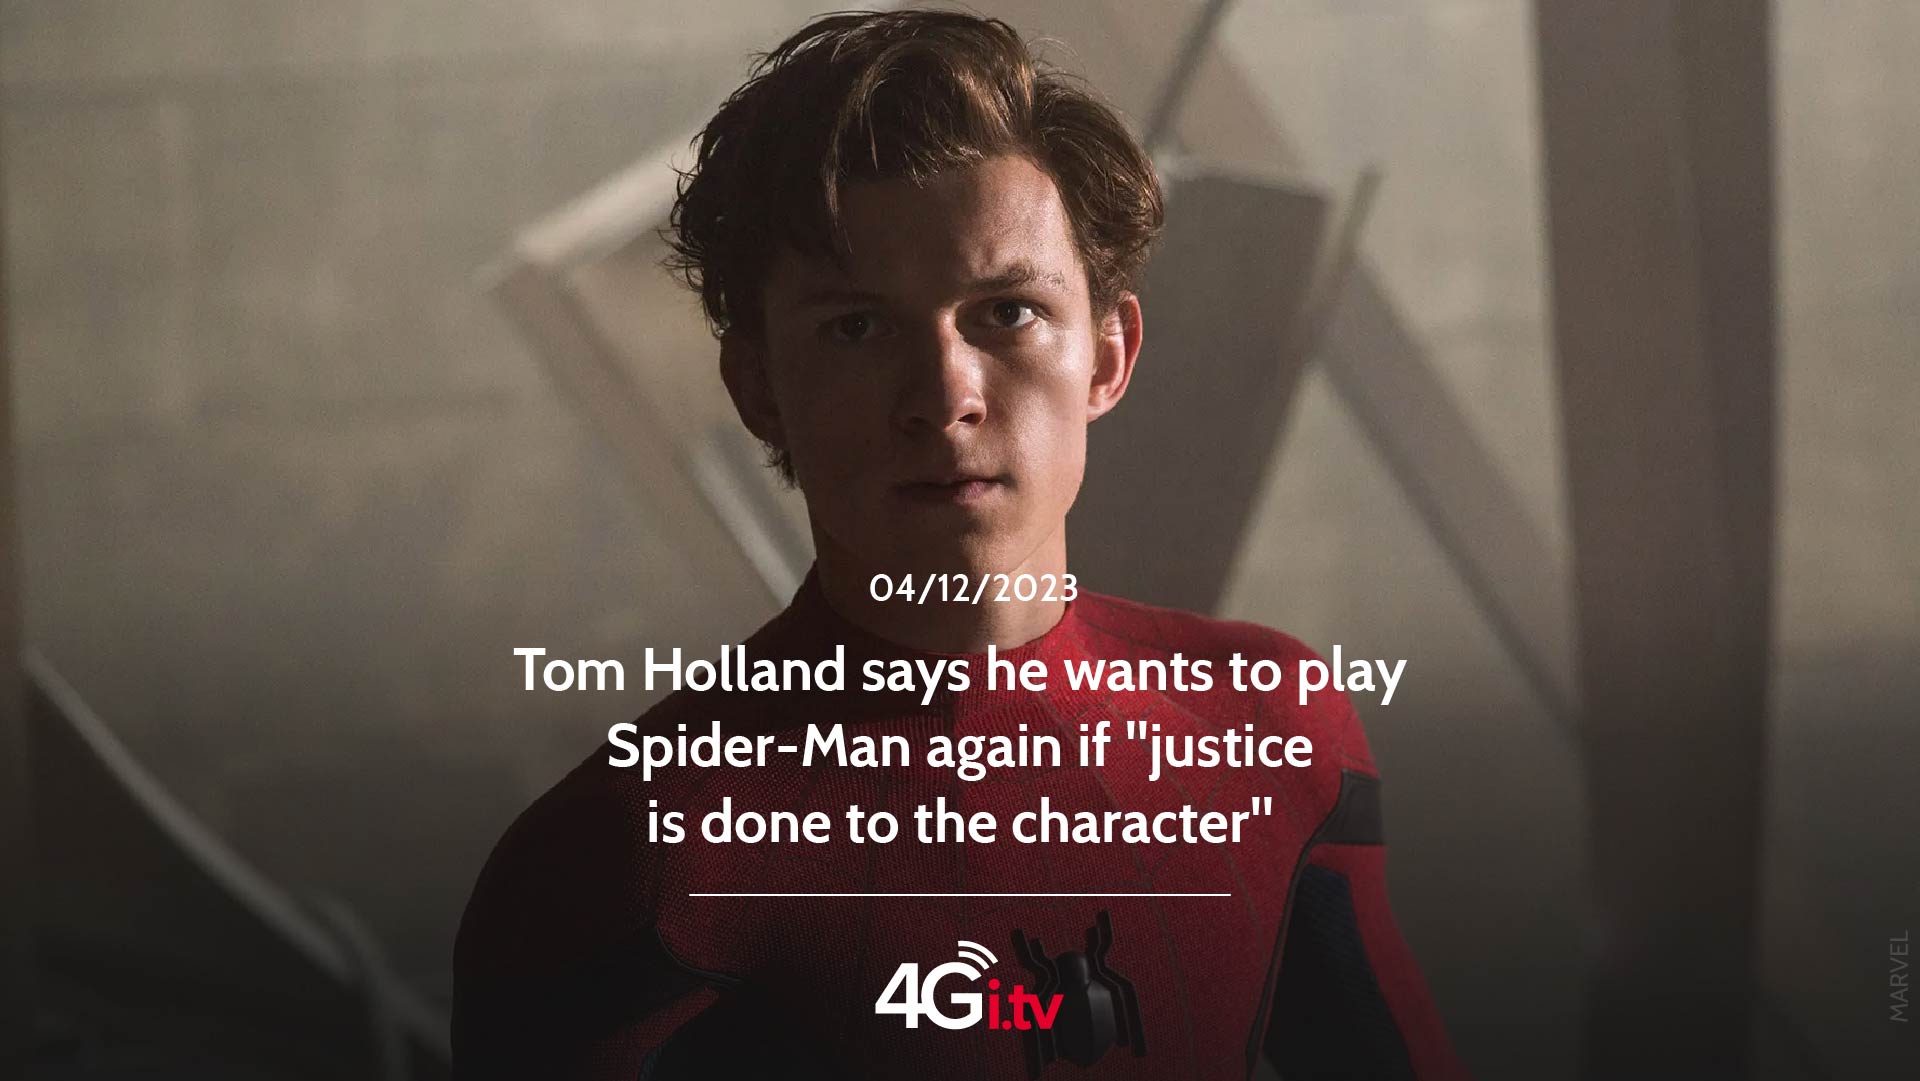 Подробнее о статье Tom Holland says he wants to play Spider-Man again if “justice is done to the character”